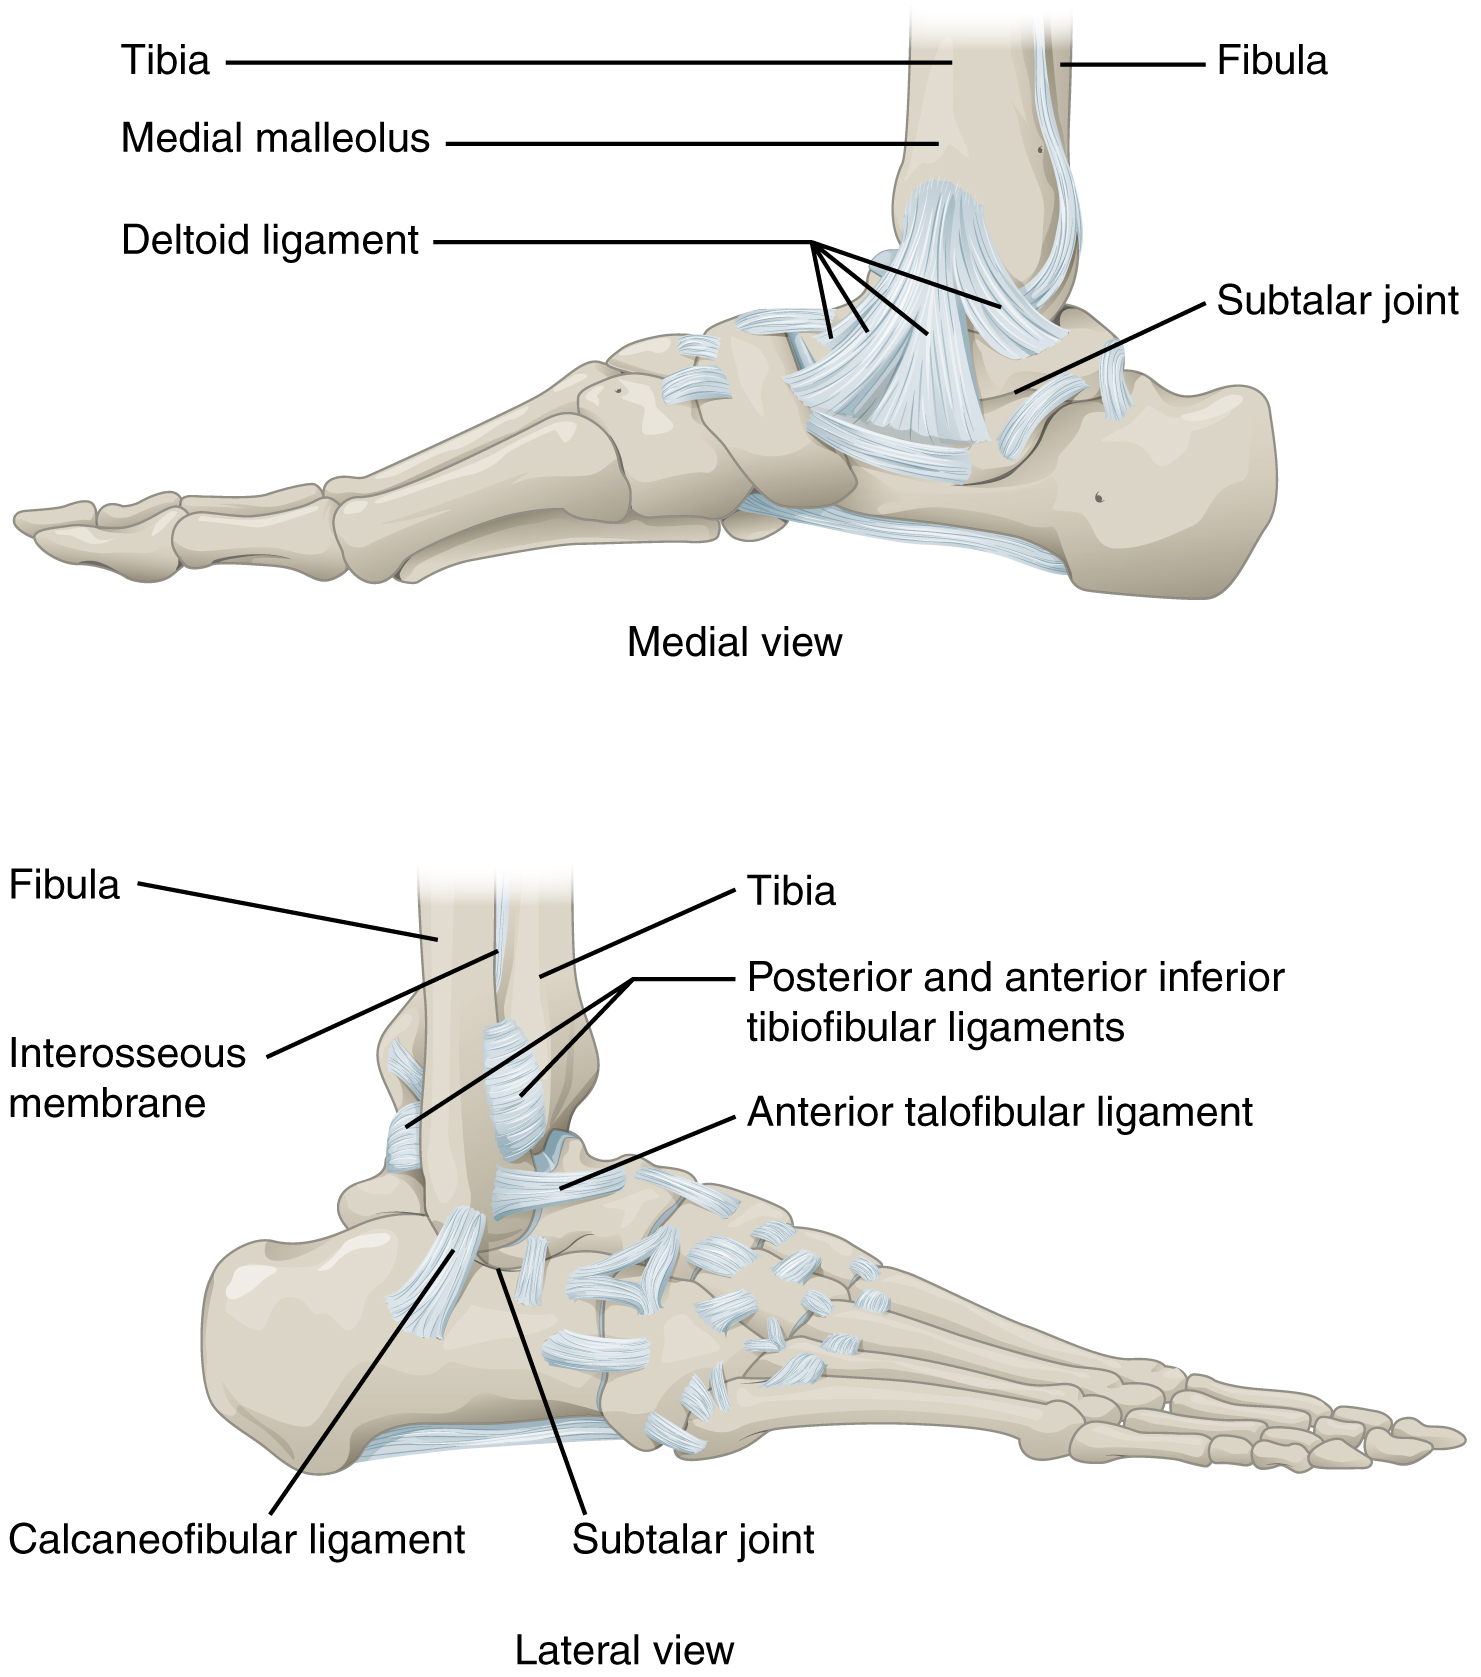 This figure shows the structure of the ankle and feet joints. The top